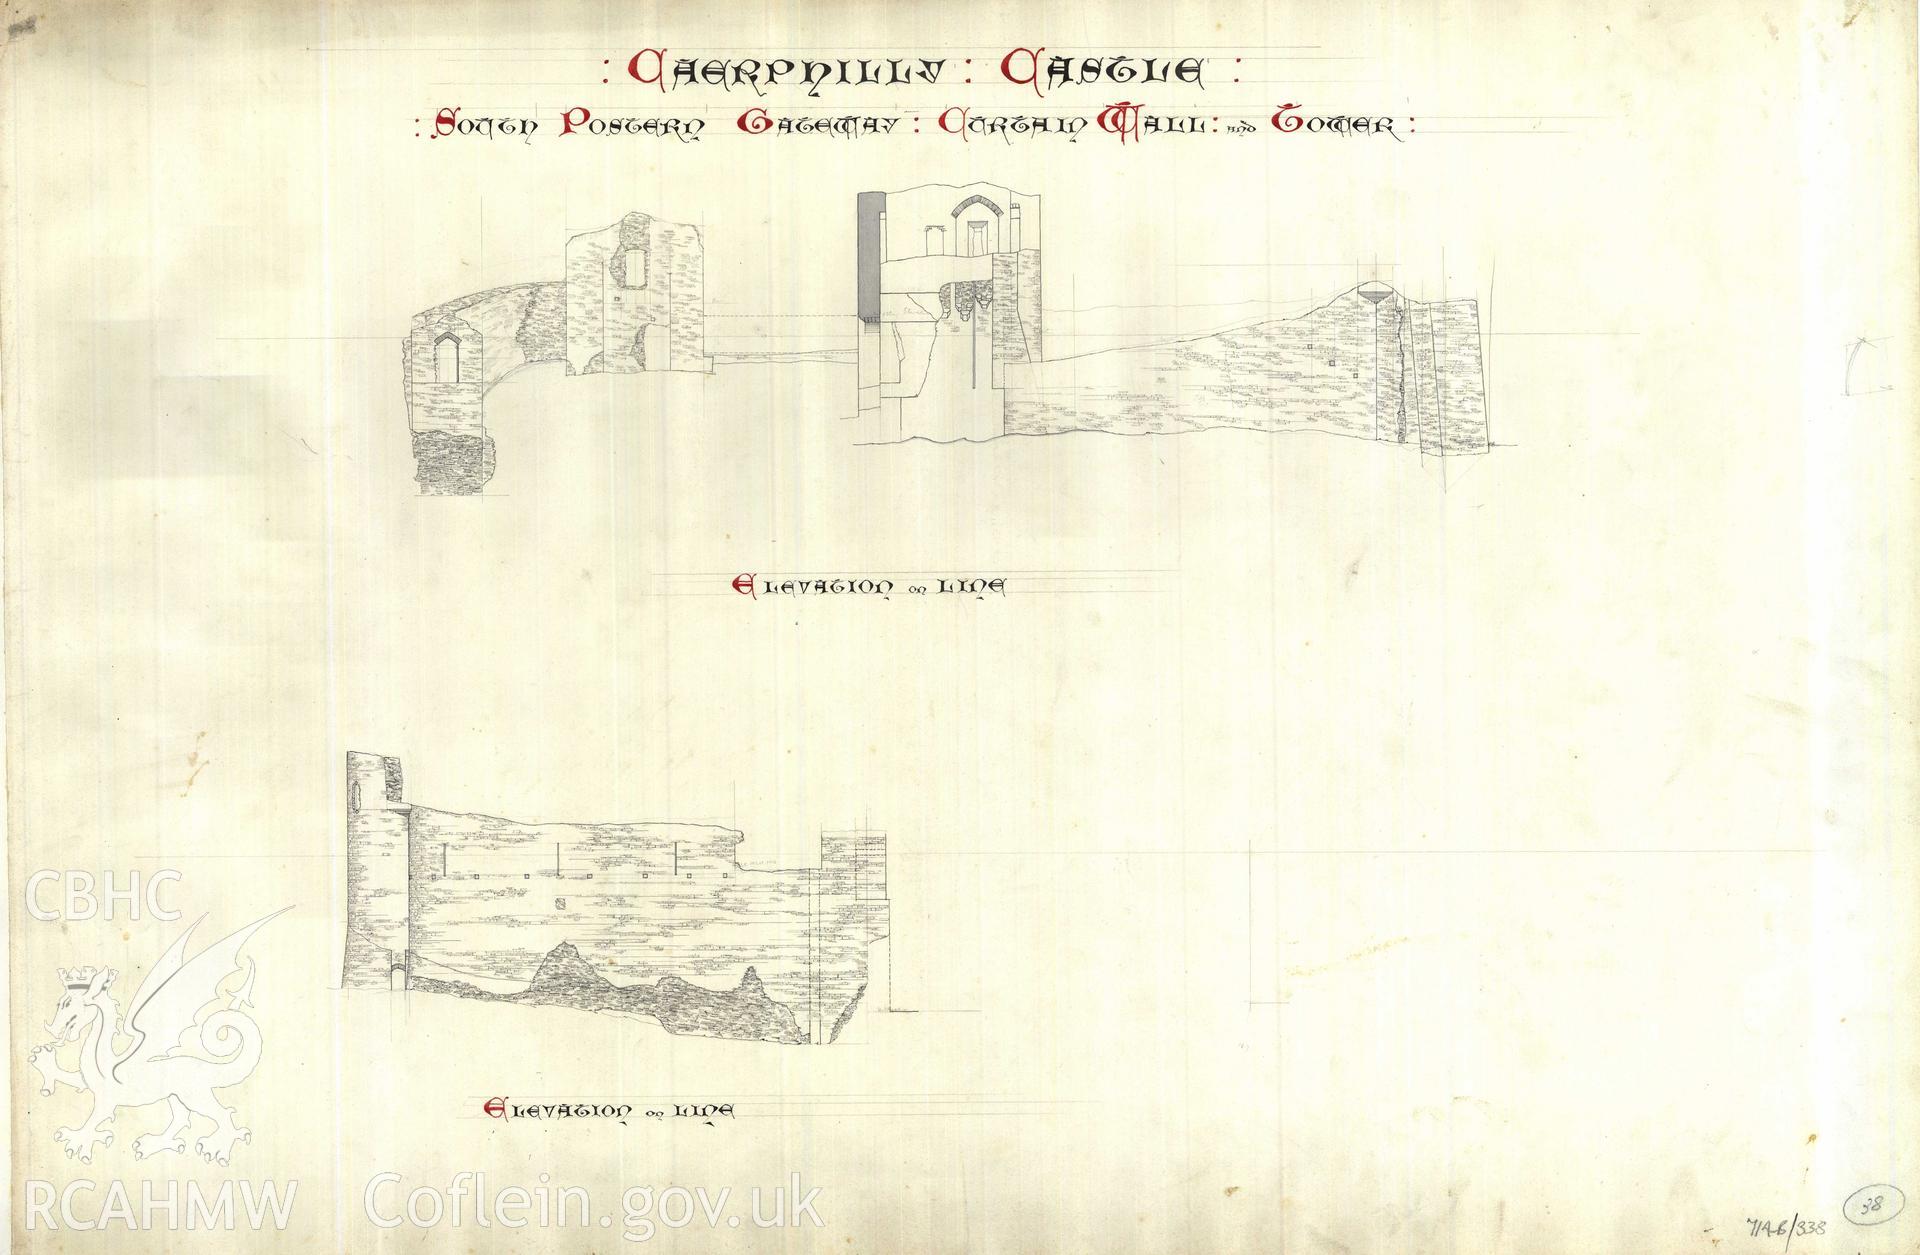 Cadw guardianship monument drawing of Caerphilly Castle. Dam, S part, 2 elevs. Cadw Ref. No:714B/338. Scale 1:96.